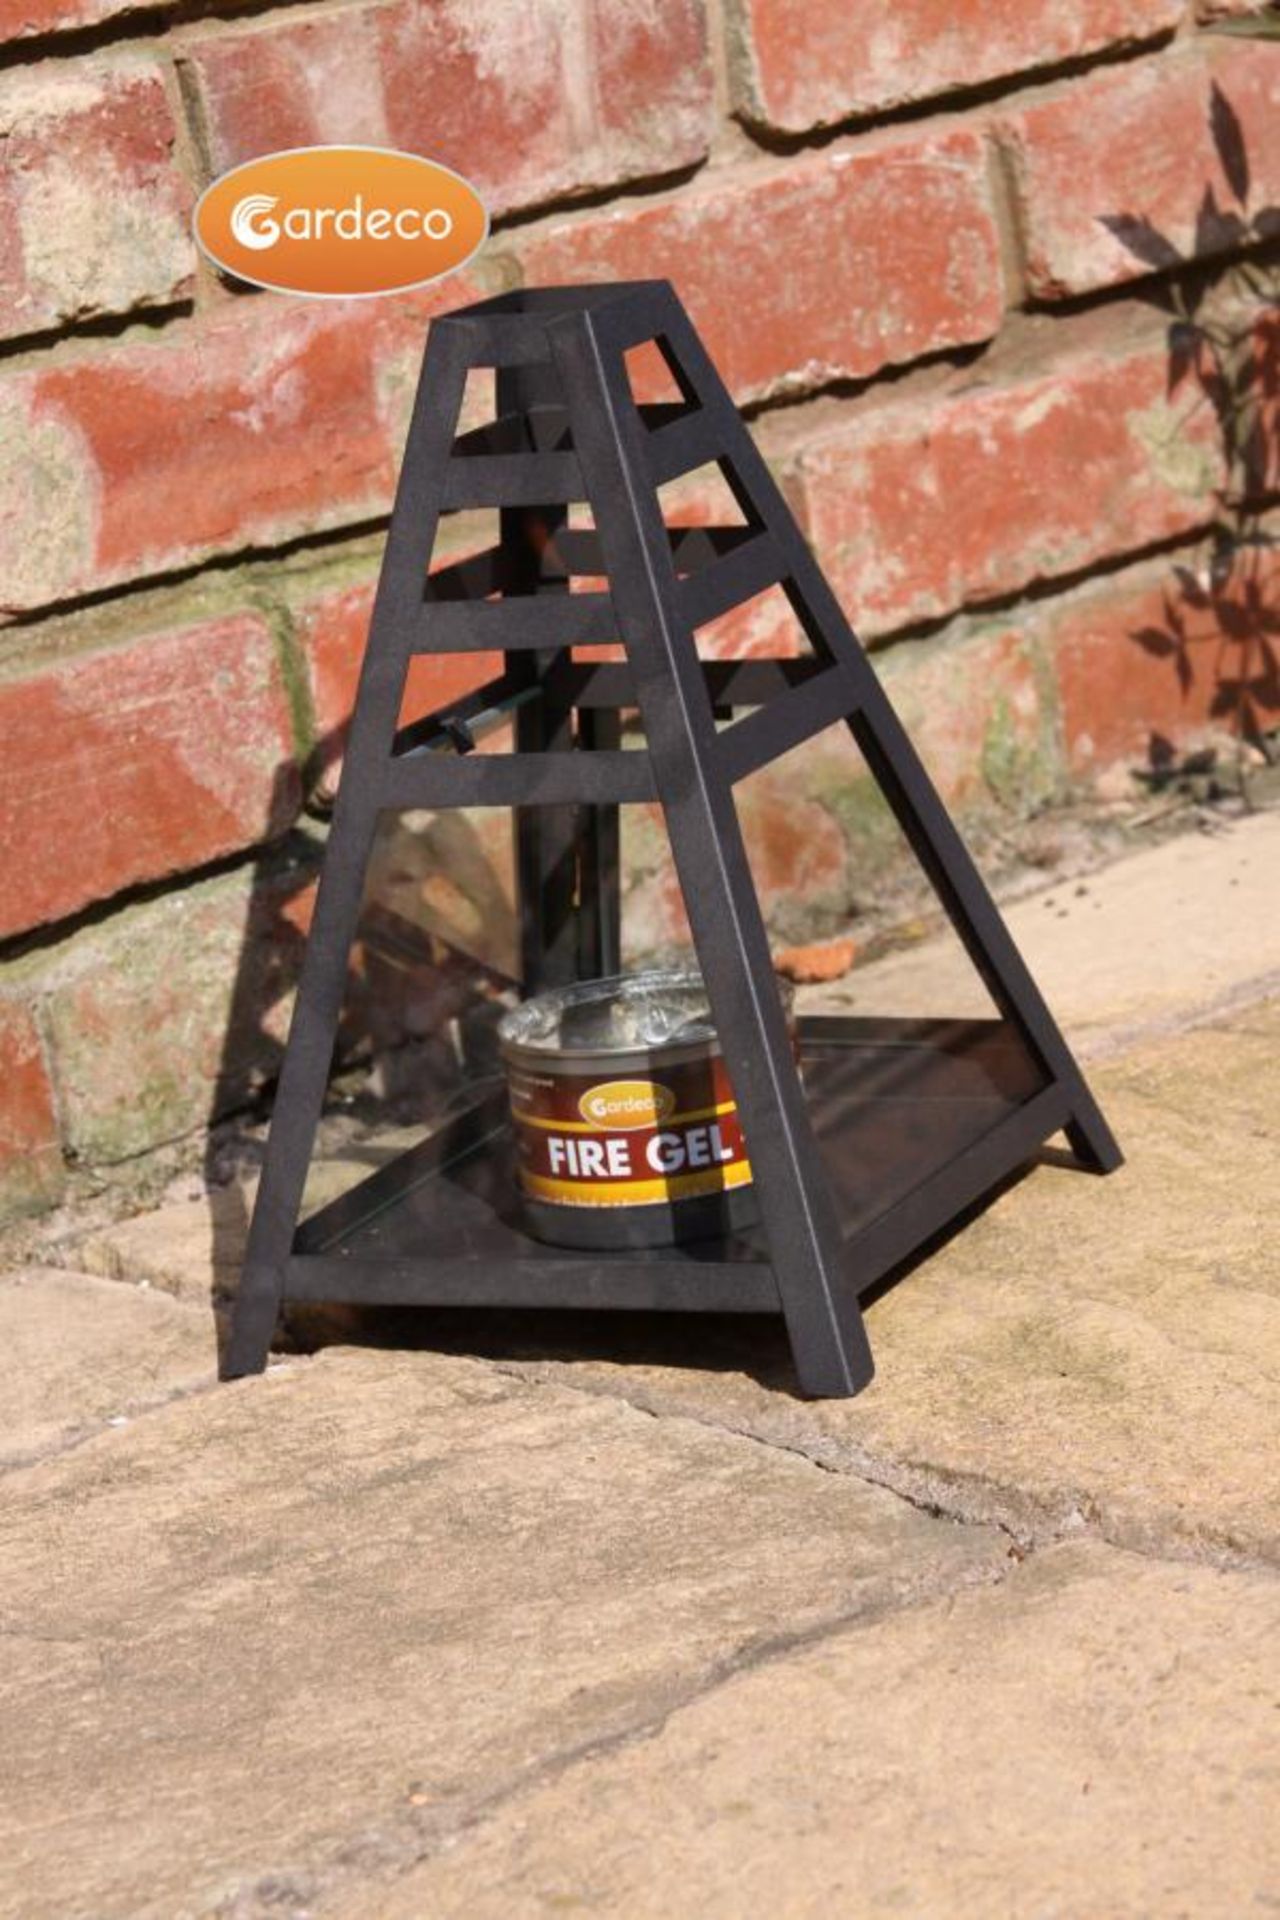 10pcs Brand new and sealed Gardeco Large Pyramid design indoor/outdoor decorative smokeless INCLUDES